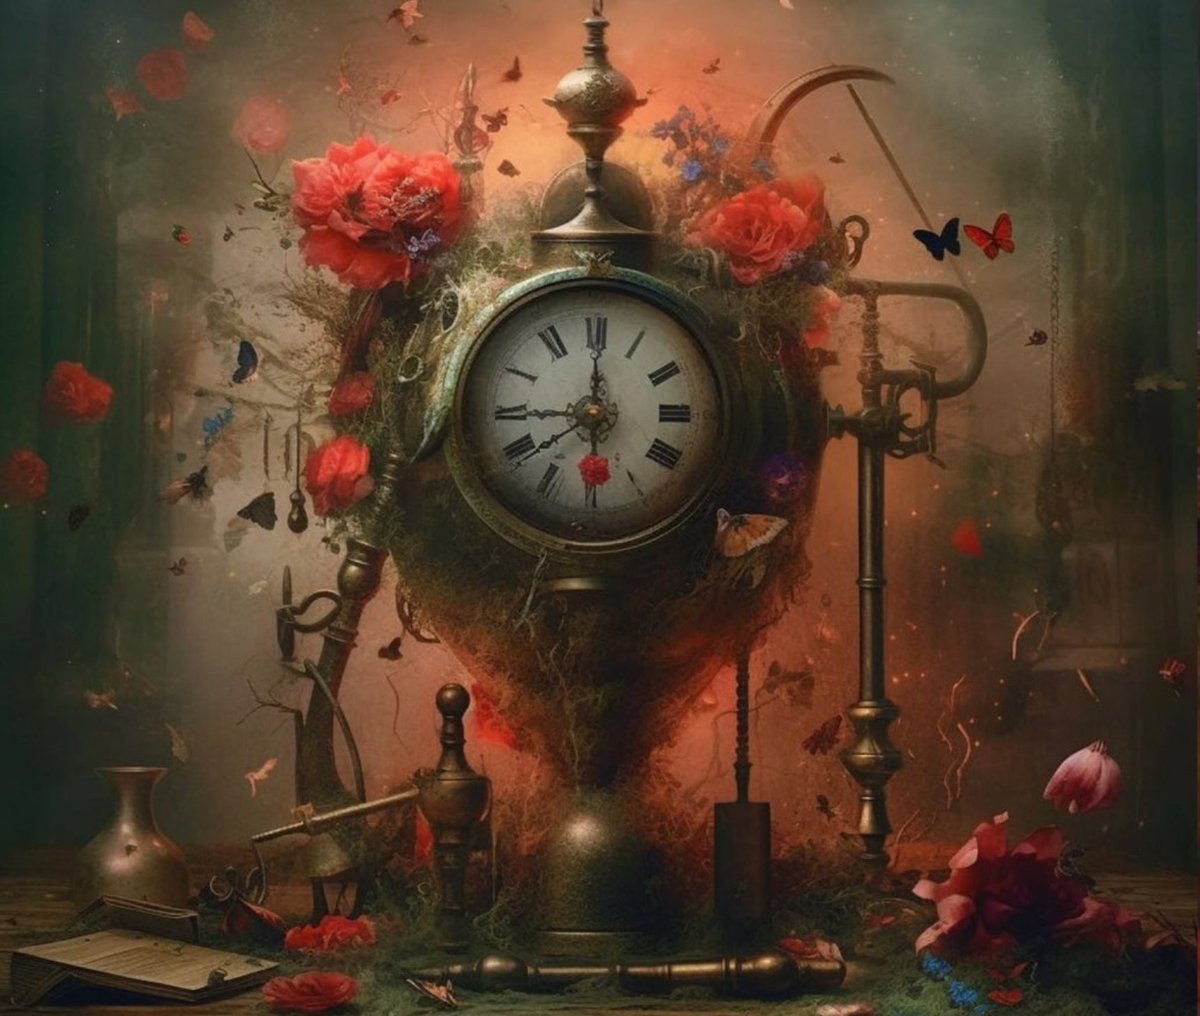 I wonder if AI red One Hundred Years of Solitude by Marquez, but l'm vividly recalling illustrations from childhood with that metaphoric theme. Does talented @ImninVanessa also read mind creating powerful concepts?
#NFTs #AIart #Marquez #clock #metaphorsaplenty